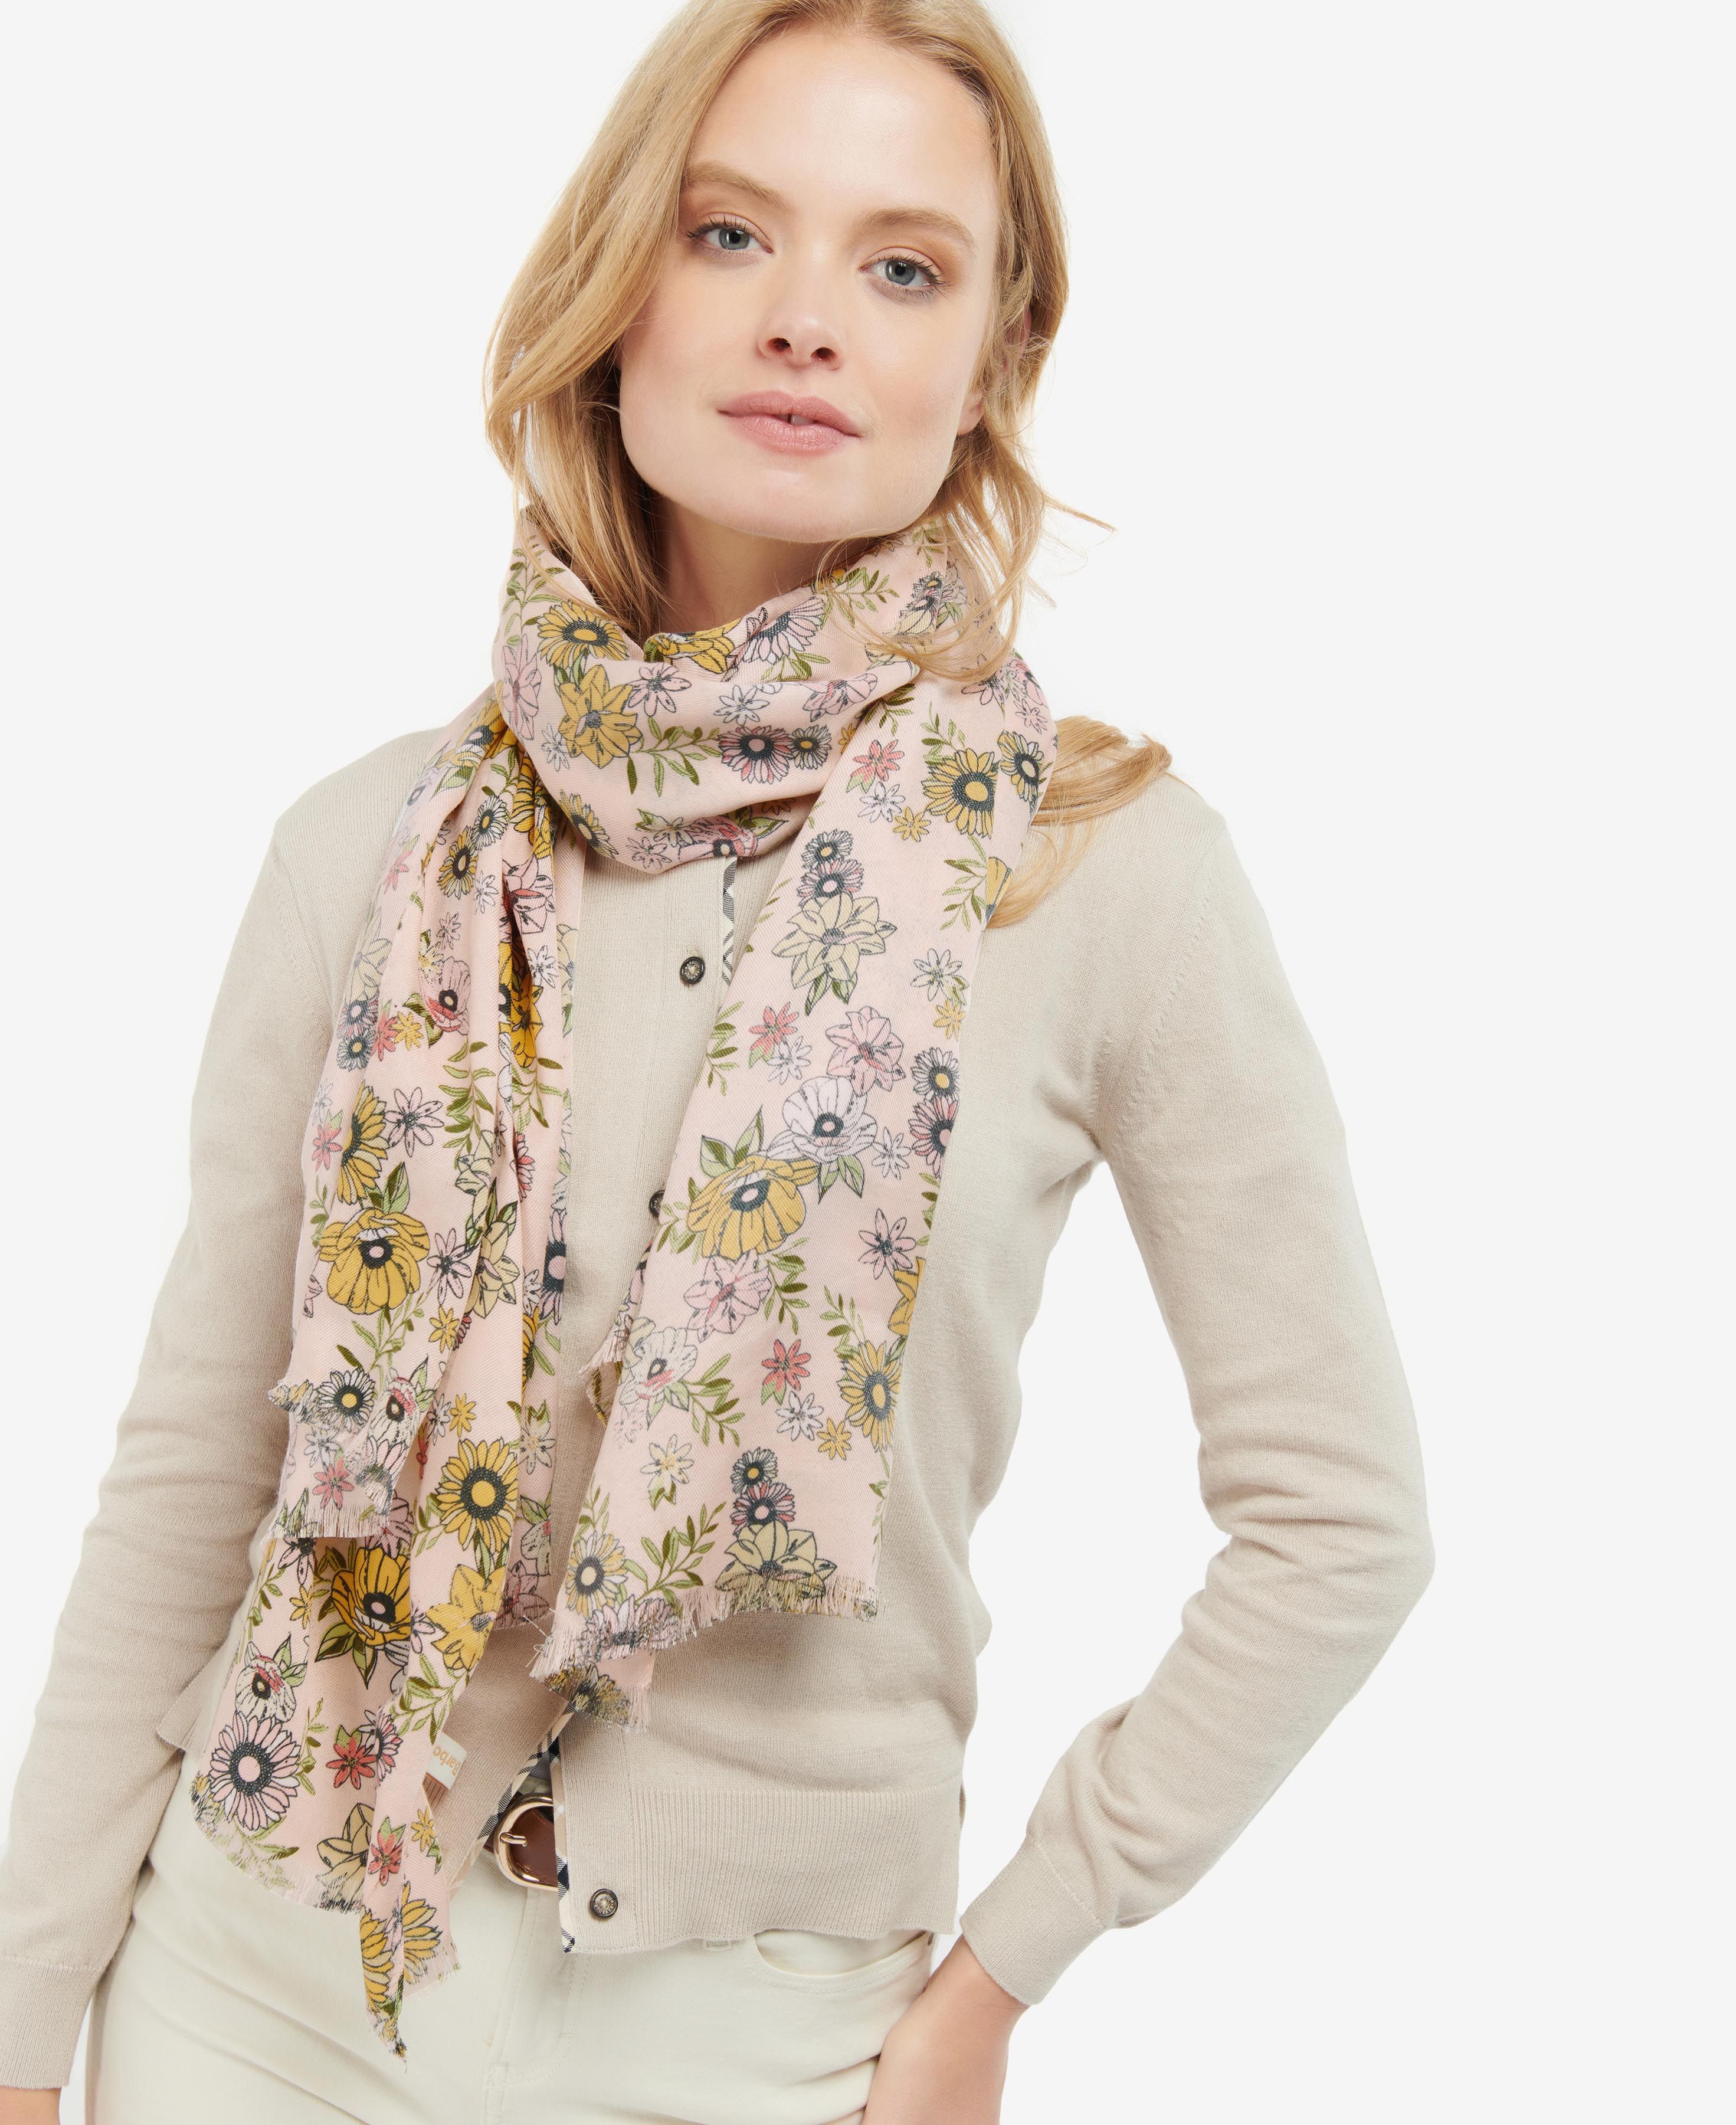 Barbour Oversized Floral Print Scarf - Peach